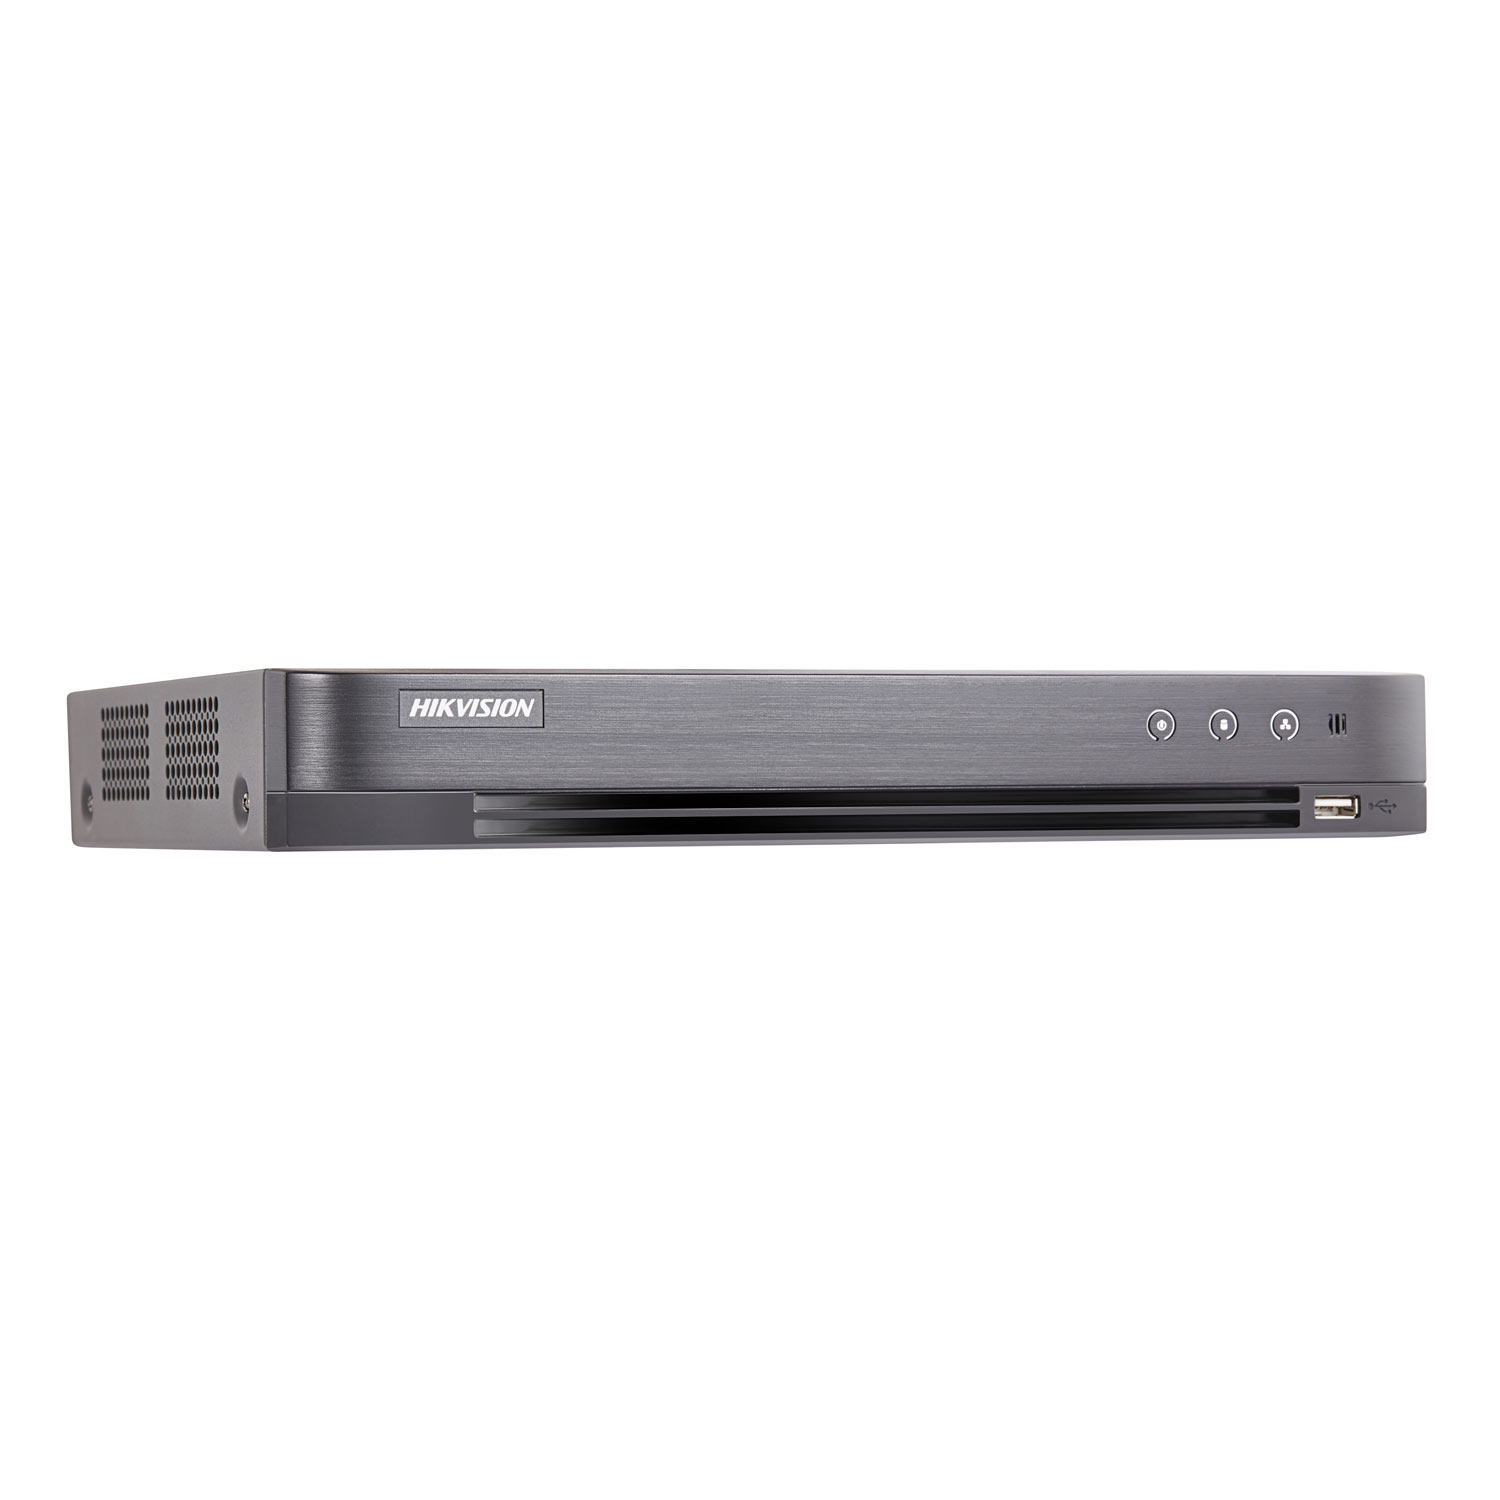 DVR HikVision Turbo HD DS-7204HTHI-K1, 4 canale, 8 MP, audio prin coaxial HikVision